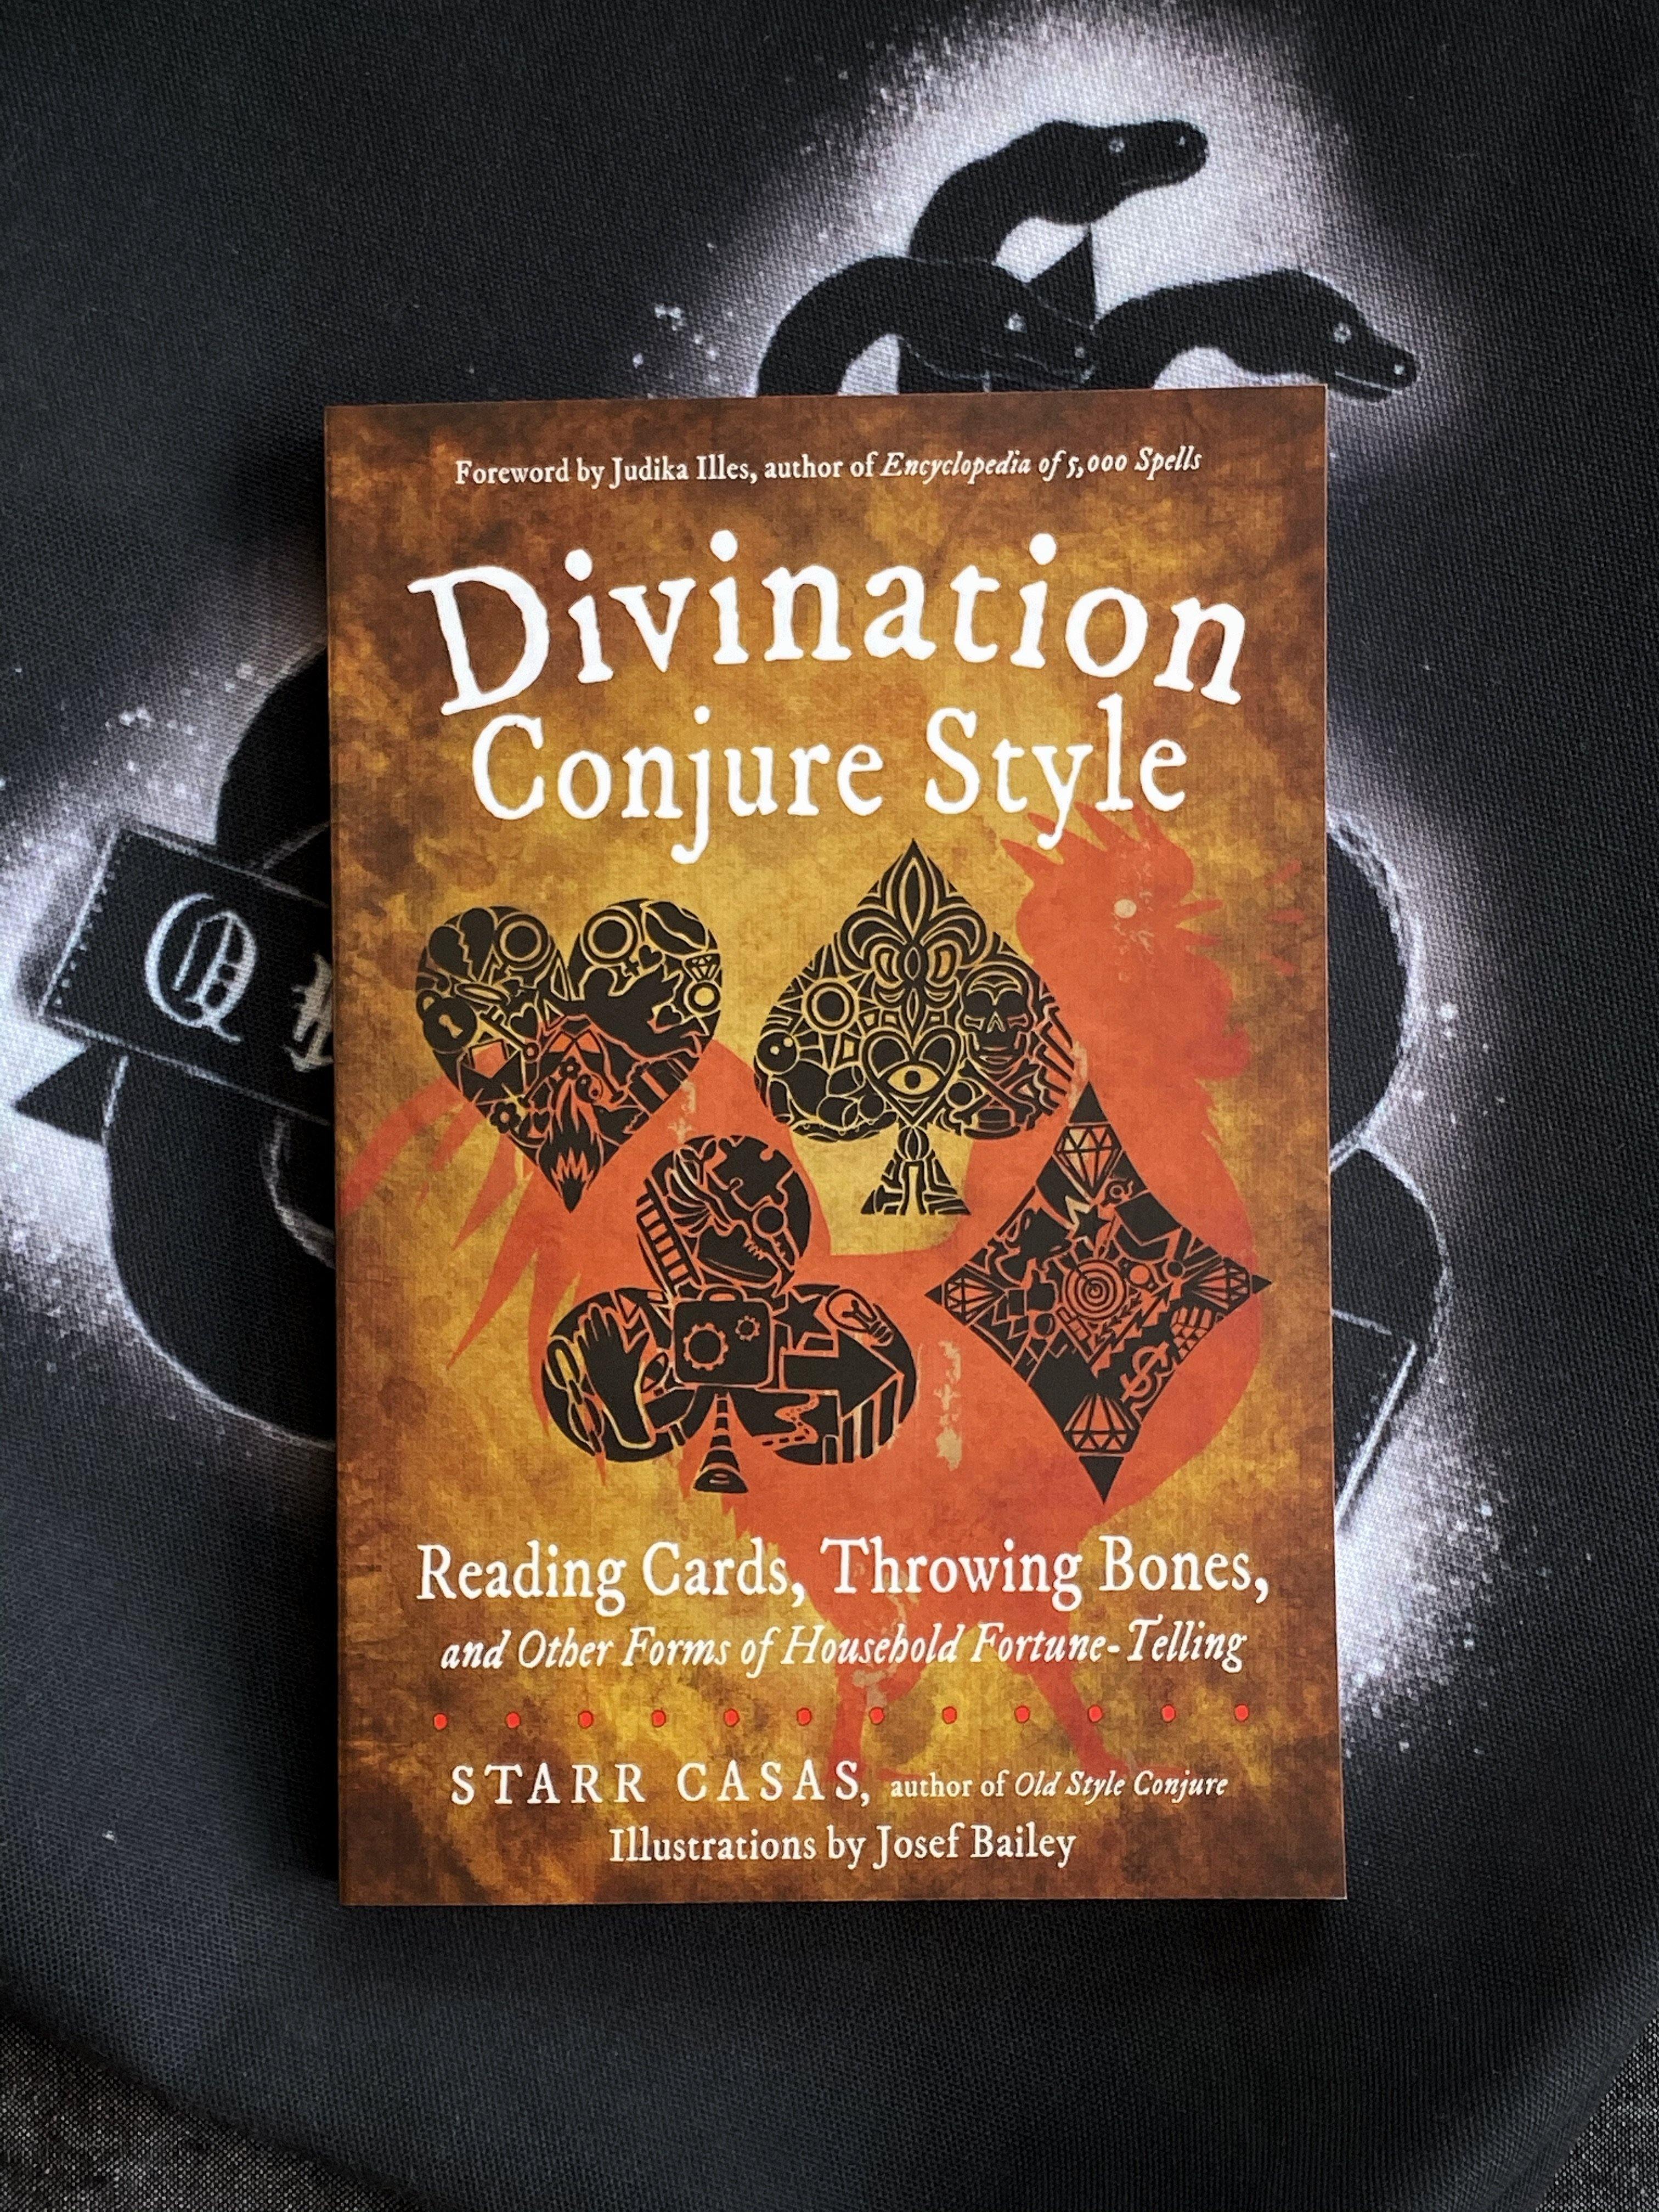 Divination Conjure Style Reading Cards, Throwing Bones, and Other Forms of Household Fortune-Telling - Keven Craft Rituals